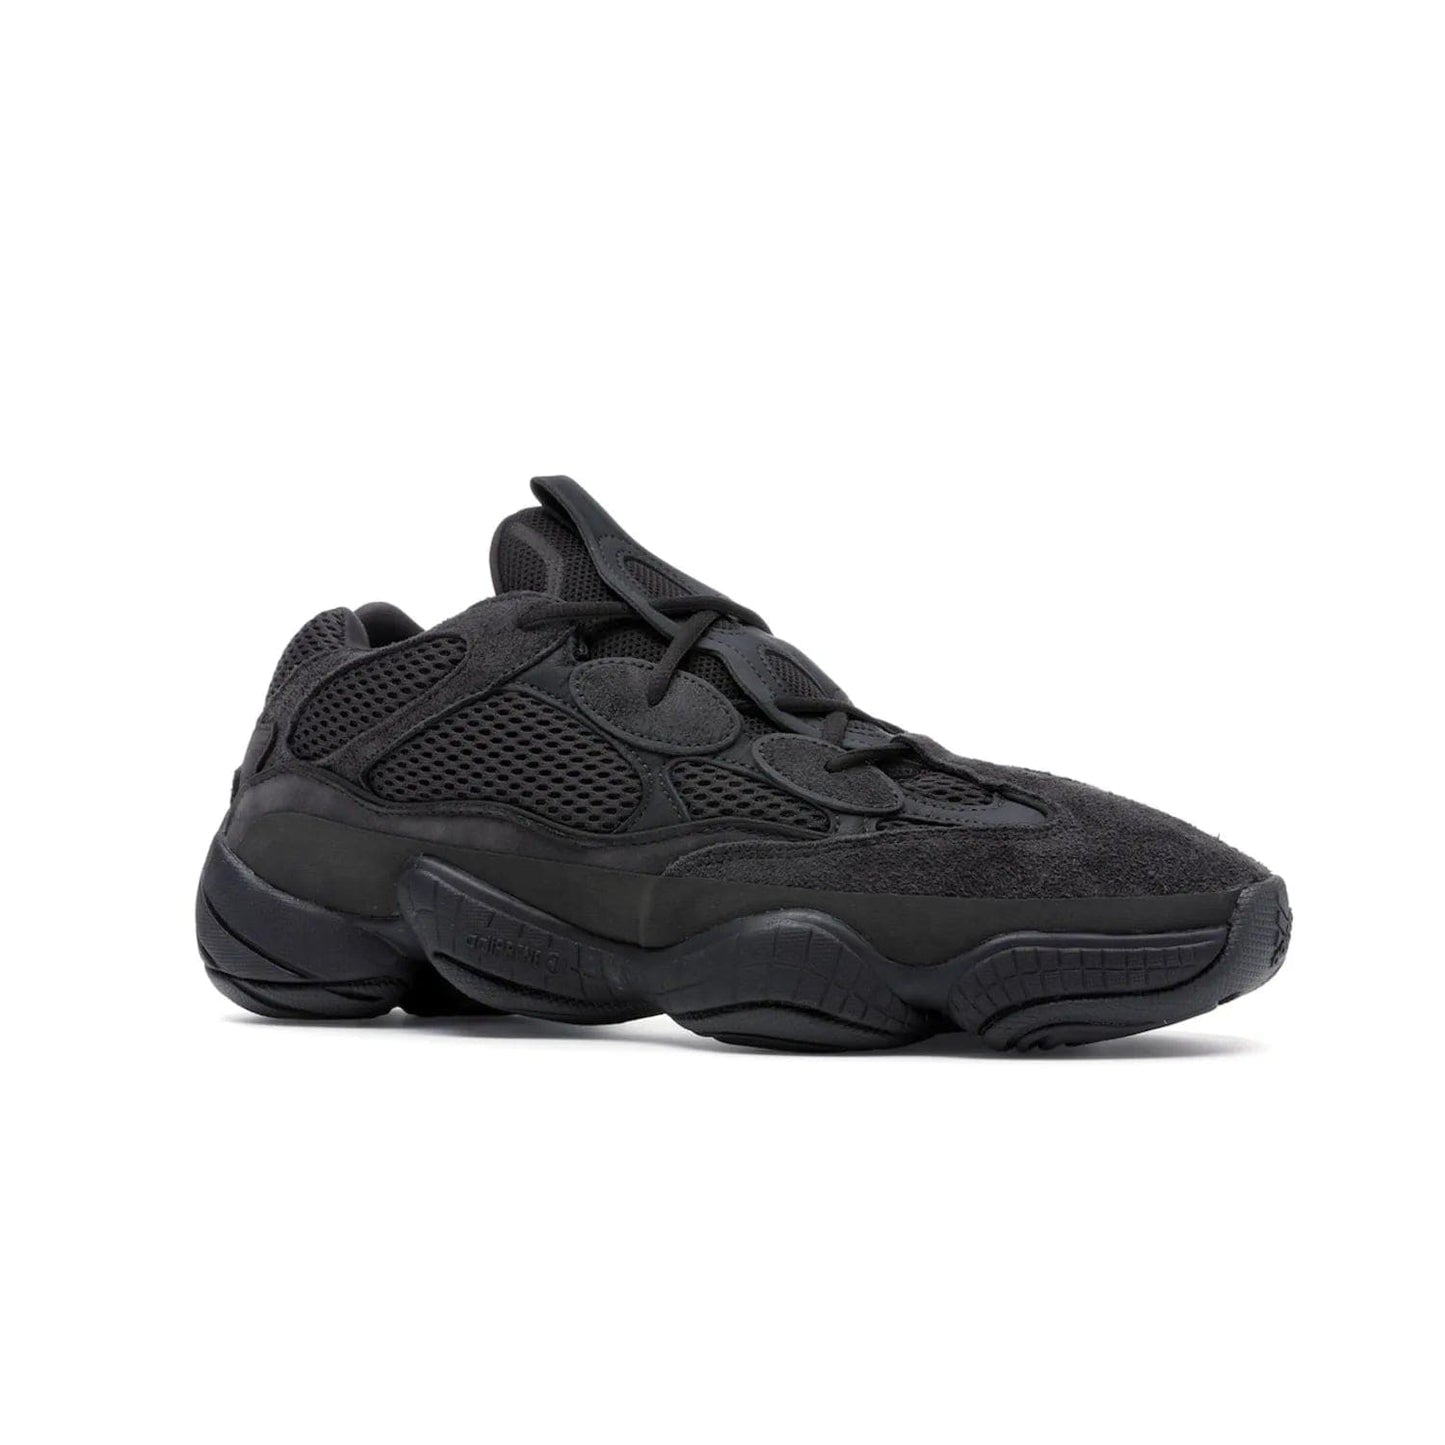 adidas Yeezy 500 Utility Black - Image 4 - Only at www.BallersClubKickz.com - Iconic adidas Yeezy 500 Utility Black in All-Black colorway. Durable black mesh and suede upper with adiPRENE® sole delivers comfort and support. Be unstoppable with the Yeezy 500 Utility Black. Released July 2018.